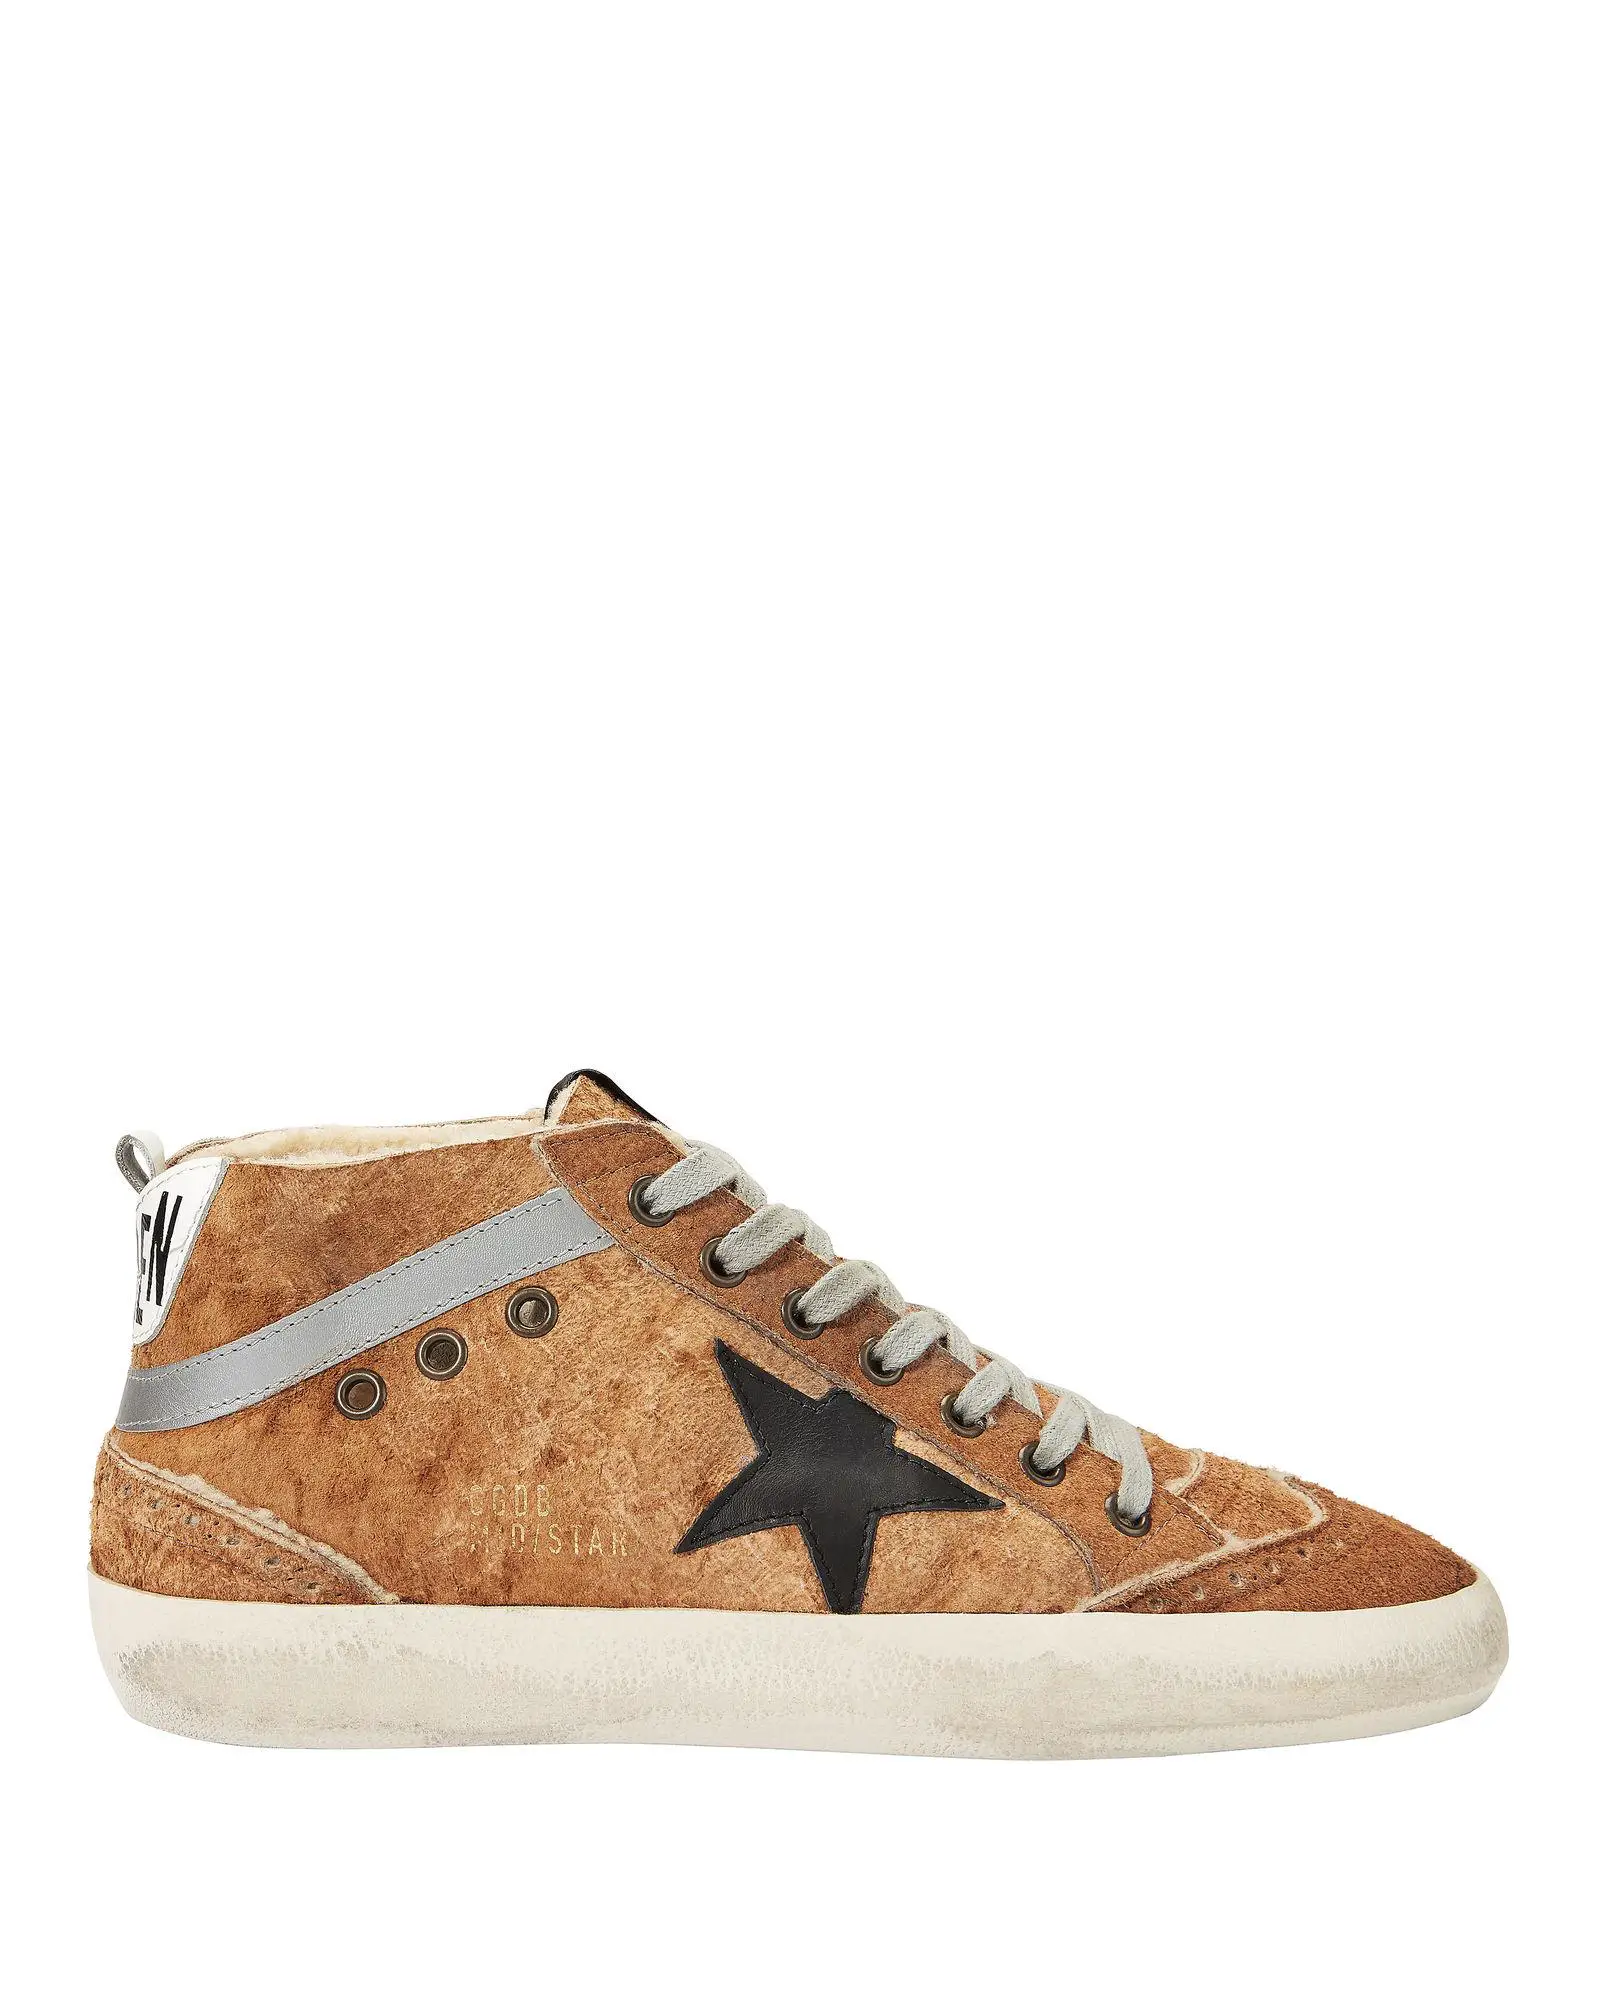 Golden Goose Mid Star Brown Leather And Shearling Sneakers